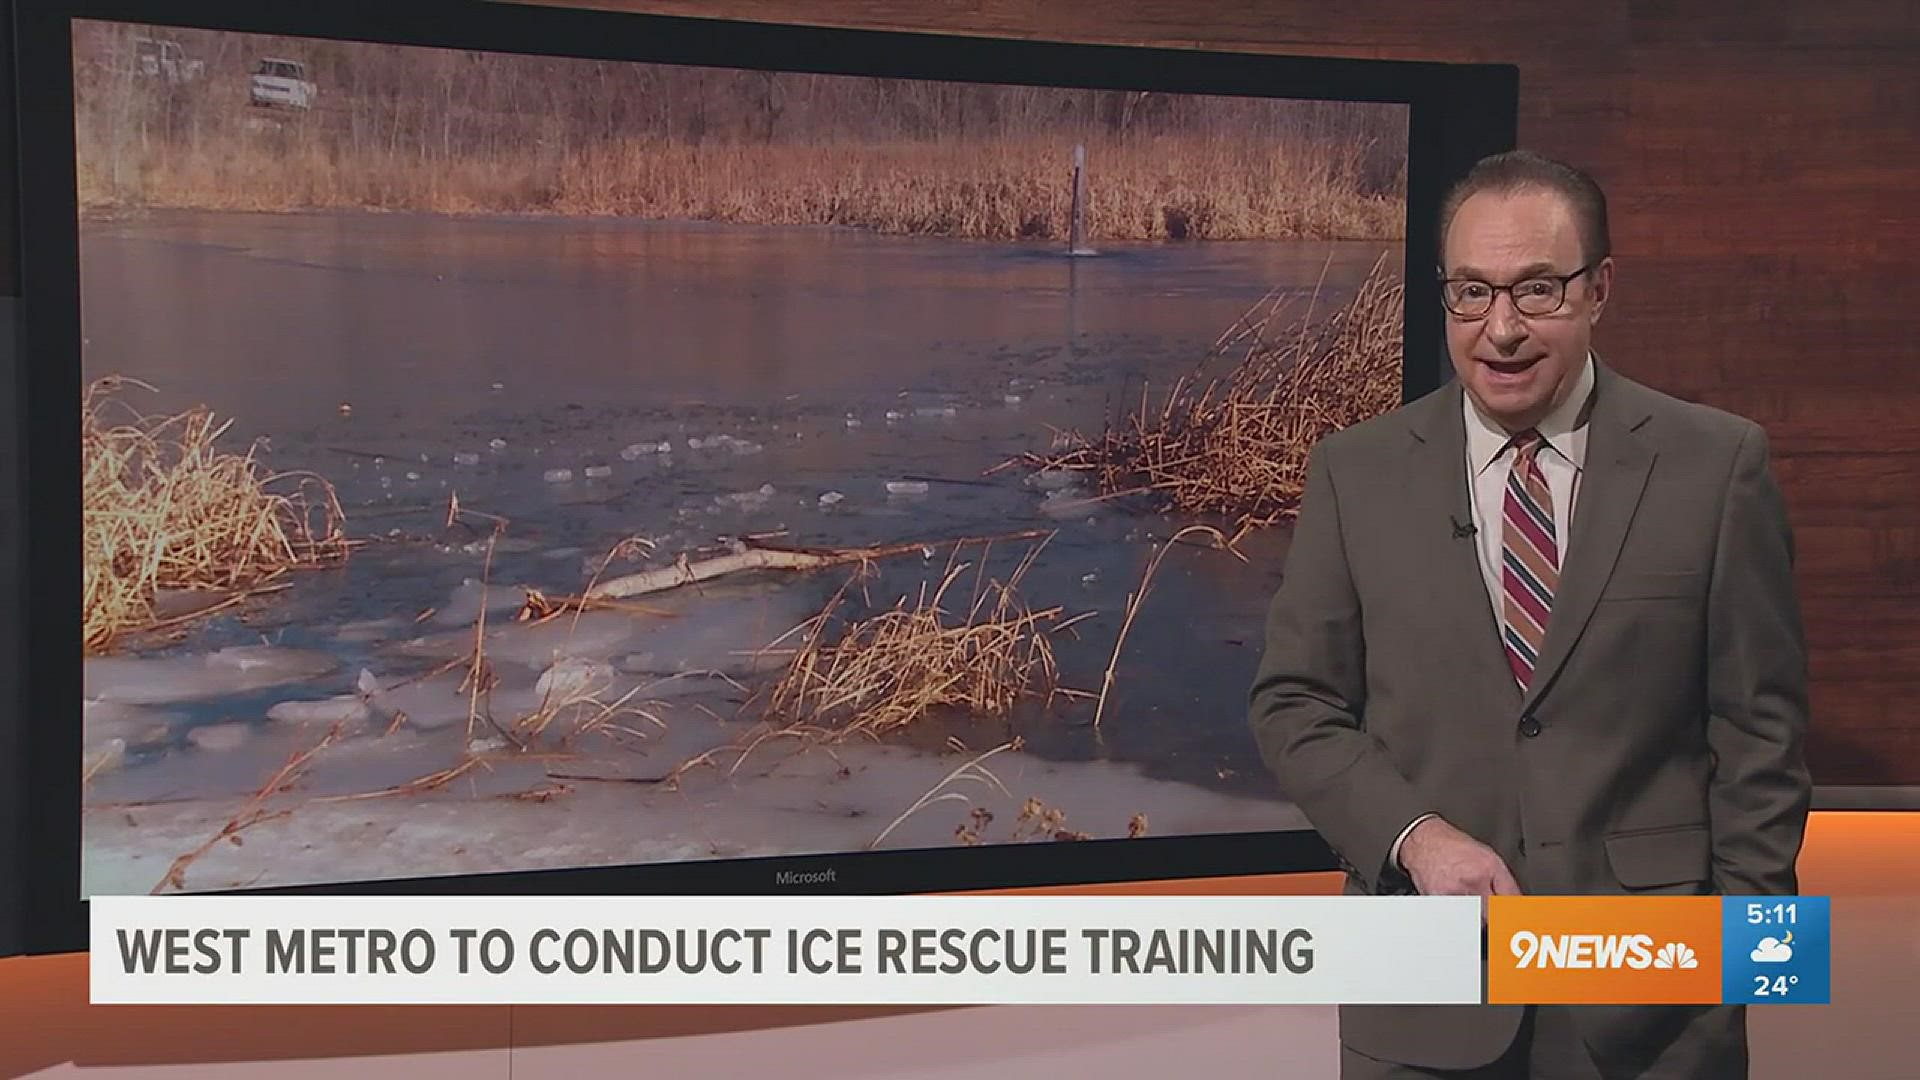 9news reporter Eddie Randle reports live from Bear Creek where the West Metro fire rescue conducts its ice rescue training program.